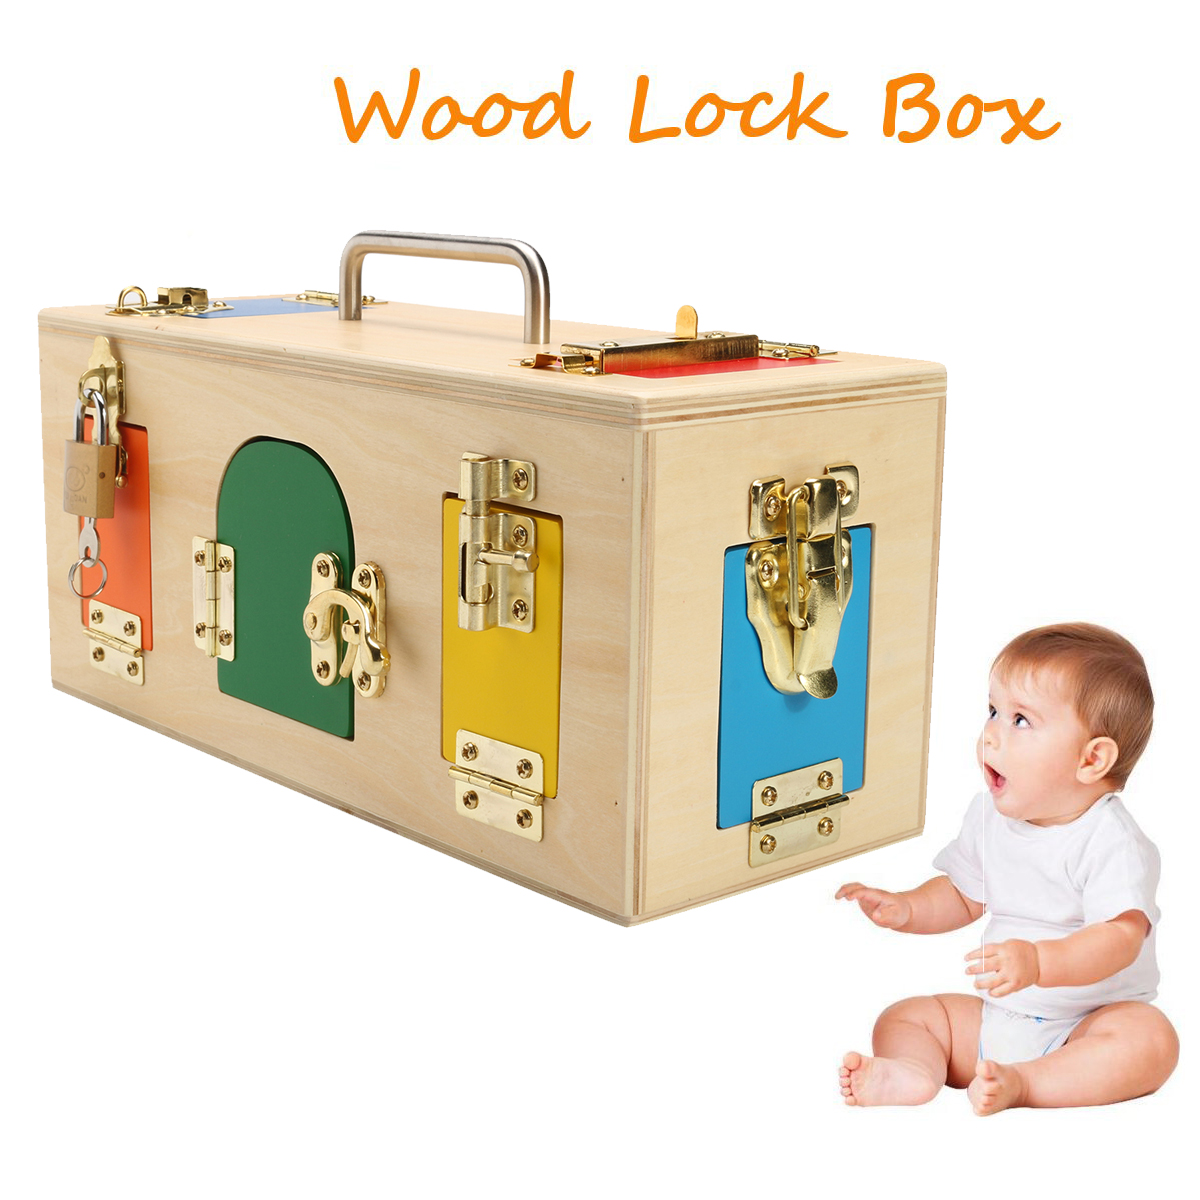 Kids-Life-Skill-Learning-Wooden-Montessori-Practical-Wood-Lock-Box-Educational-Science-Toys-1392942-2